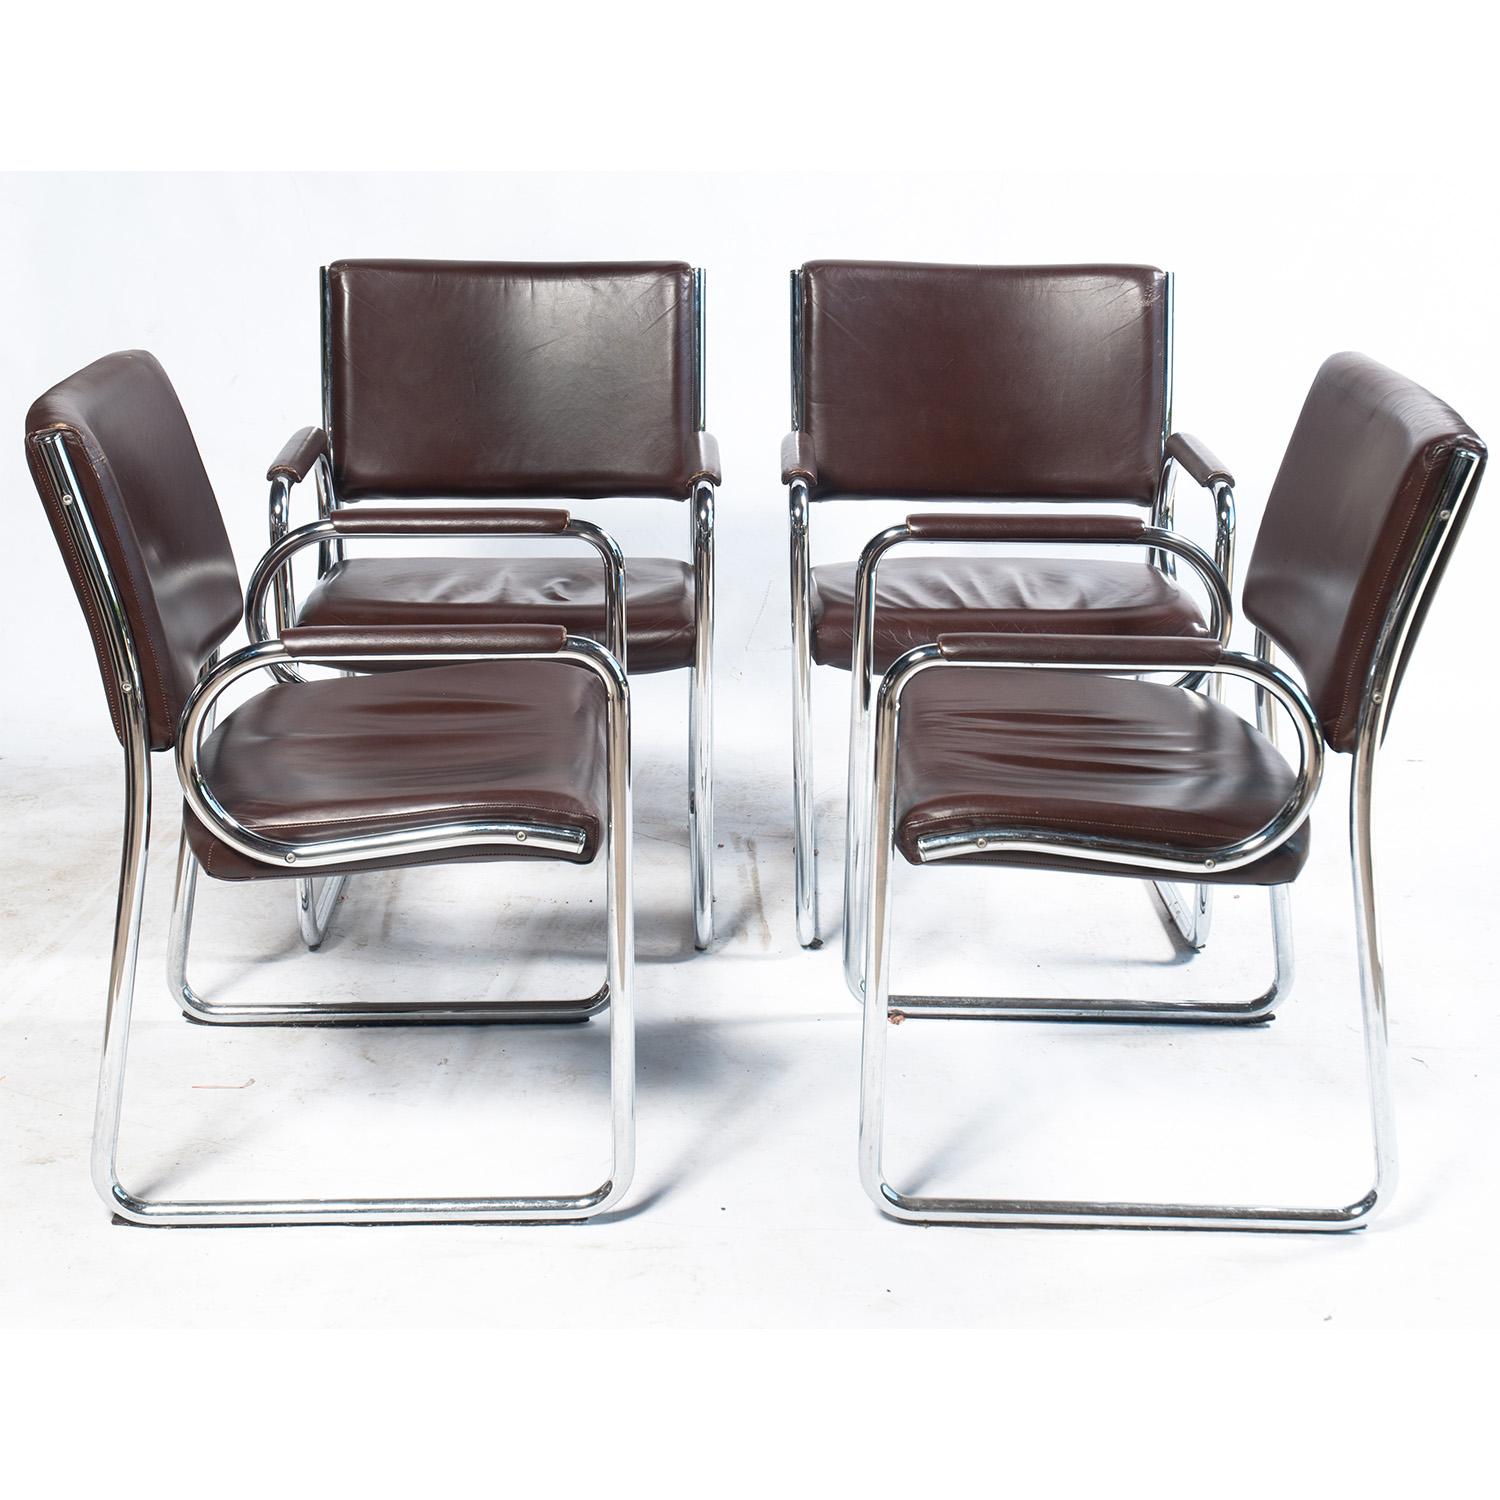 vintage chrome kitchen chairs for sale